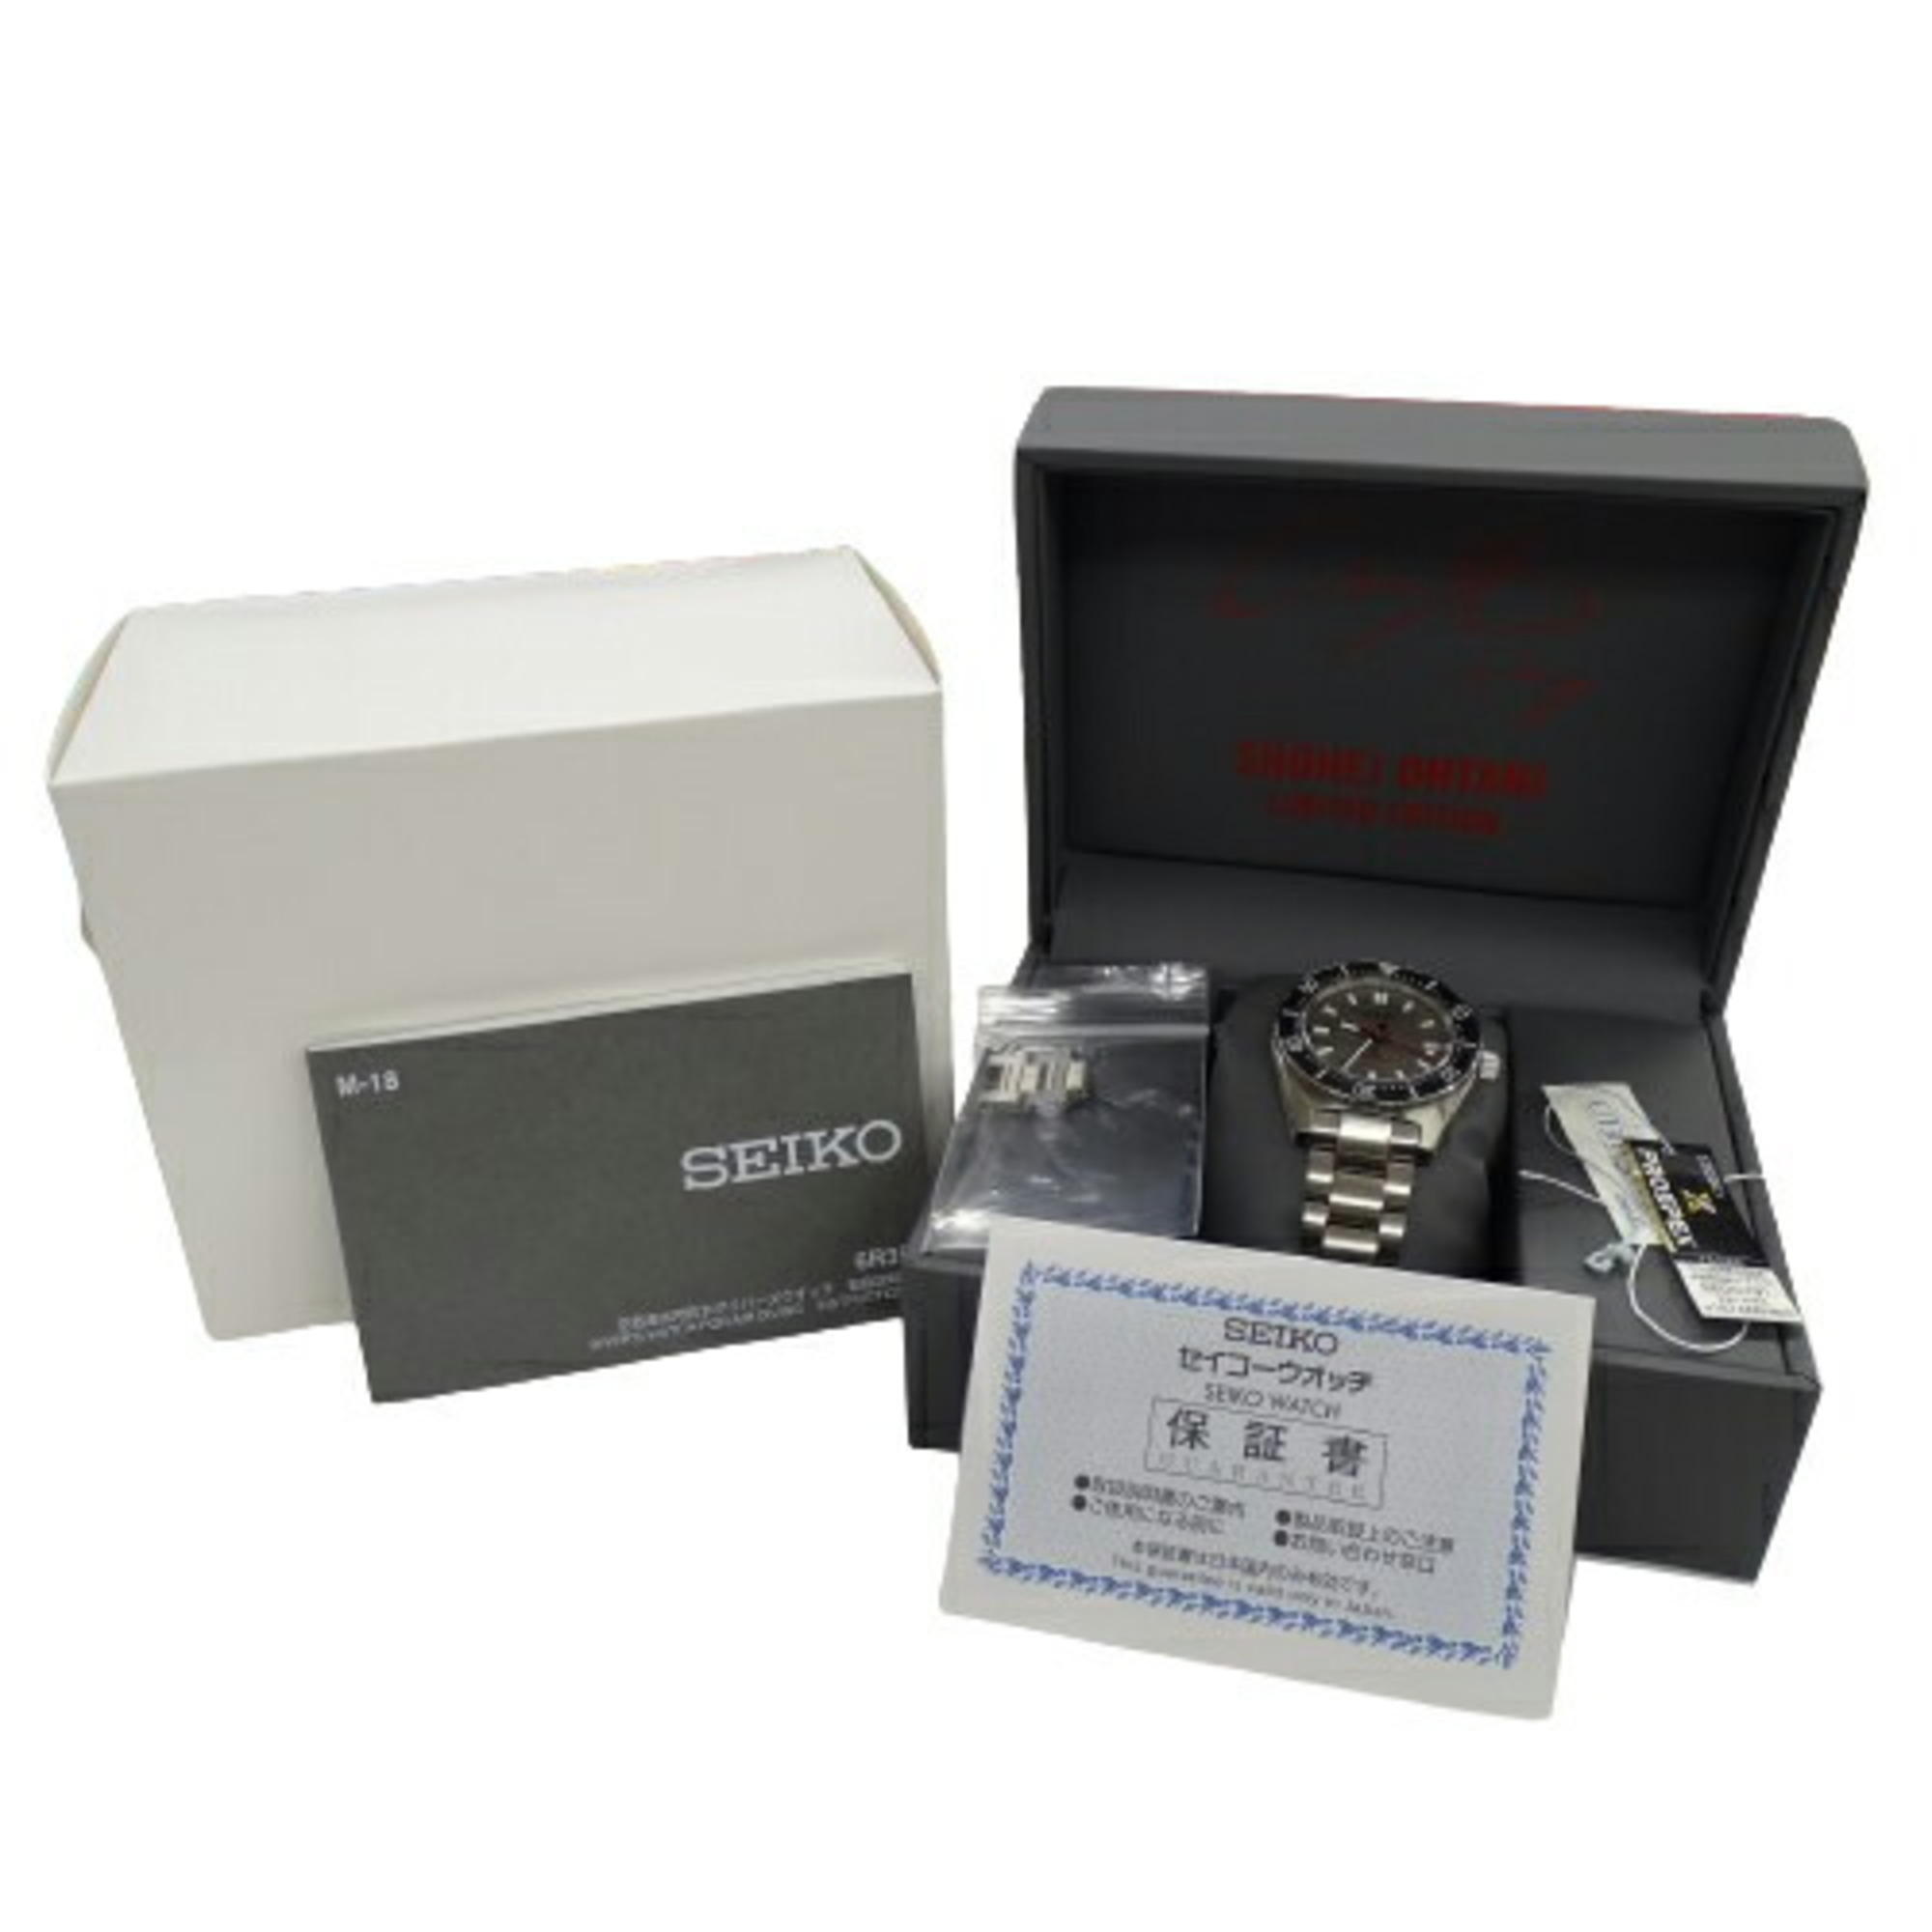 Seiko Prospex 6R35-02W0 SBDC191 Watch Men's Diver Scuba Shohei Otani 2023 Limited Edition Date Automatic AT Stainless Steel SS Gray